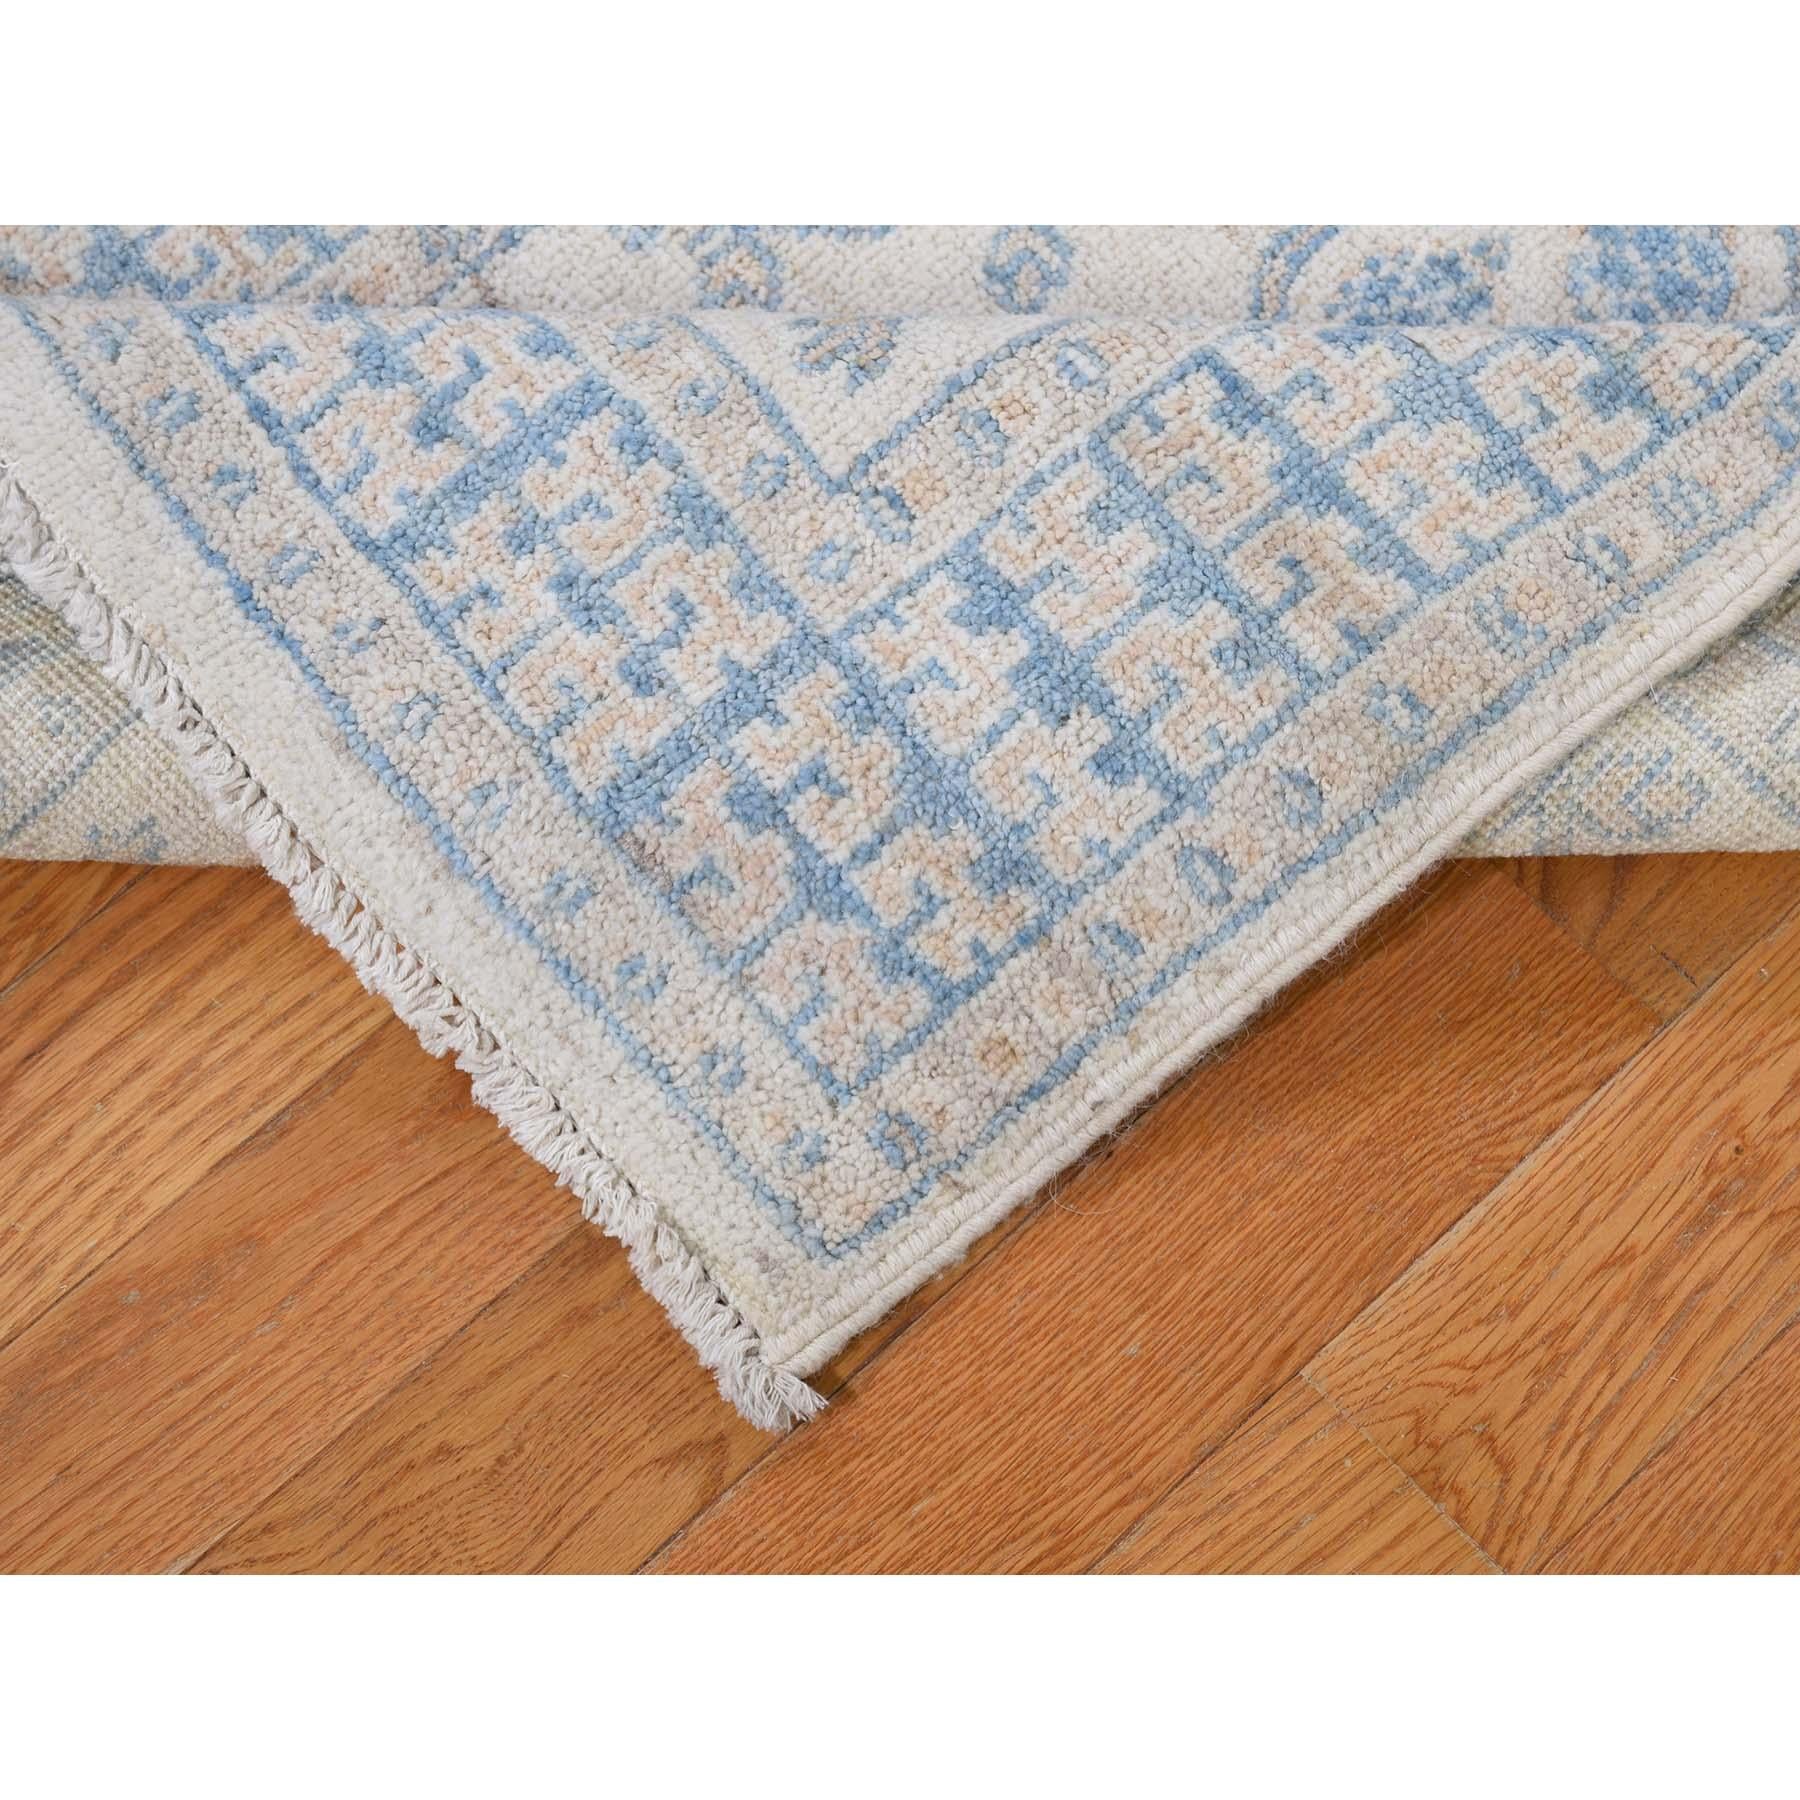 Wool White Wash Khotan with Pomegranate Design Runner Hand Knotted Rug